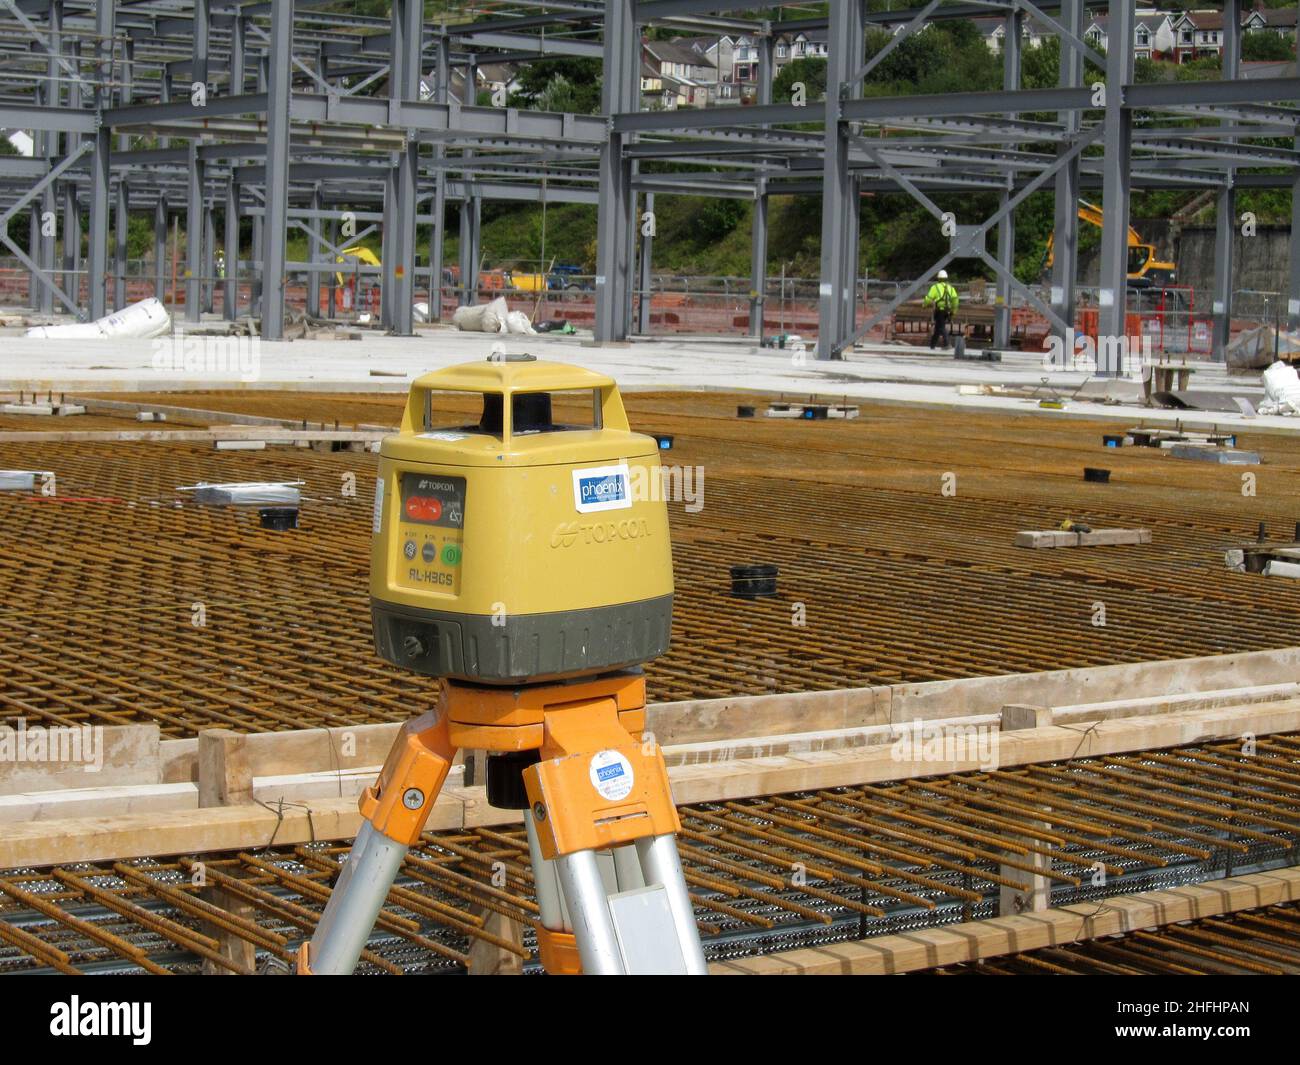 August 2011 - Contractors surveying and levelling equipment on a tripod adjacent to a works area ready to receive the deliveries of wet concrete Stock Photo